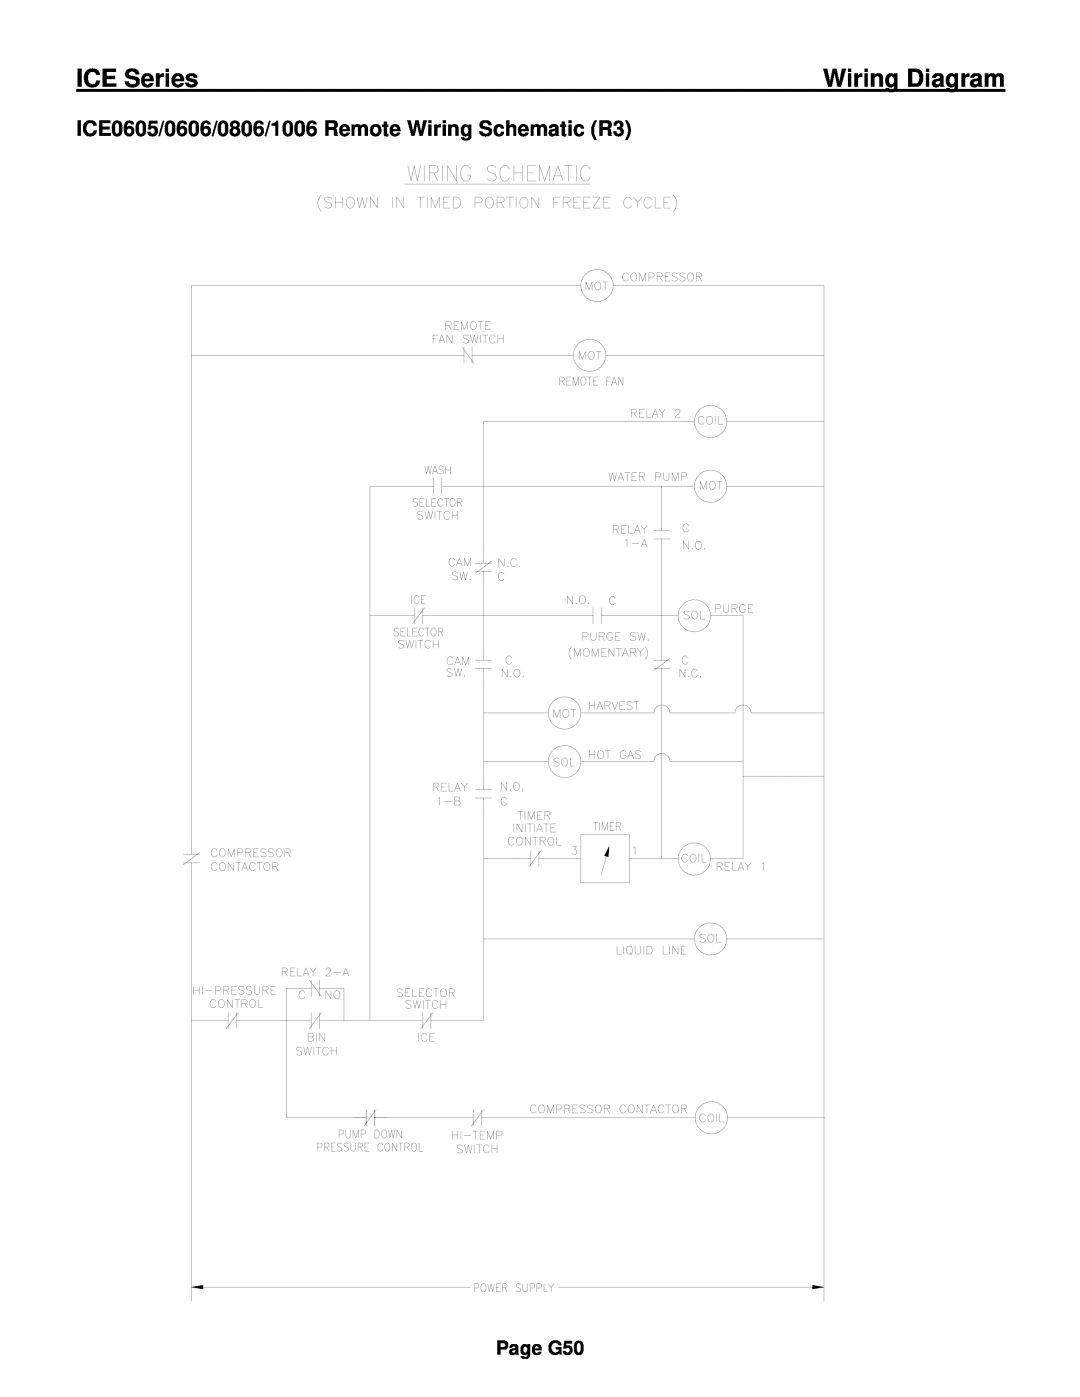 Ice-O-Matic ICE0250 Series ICE0605/0606/0806/1006 Remote Wiring Schematic R3, ICE Series, Wiring Diagram, Page G50 